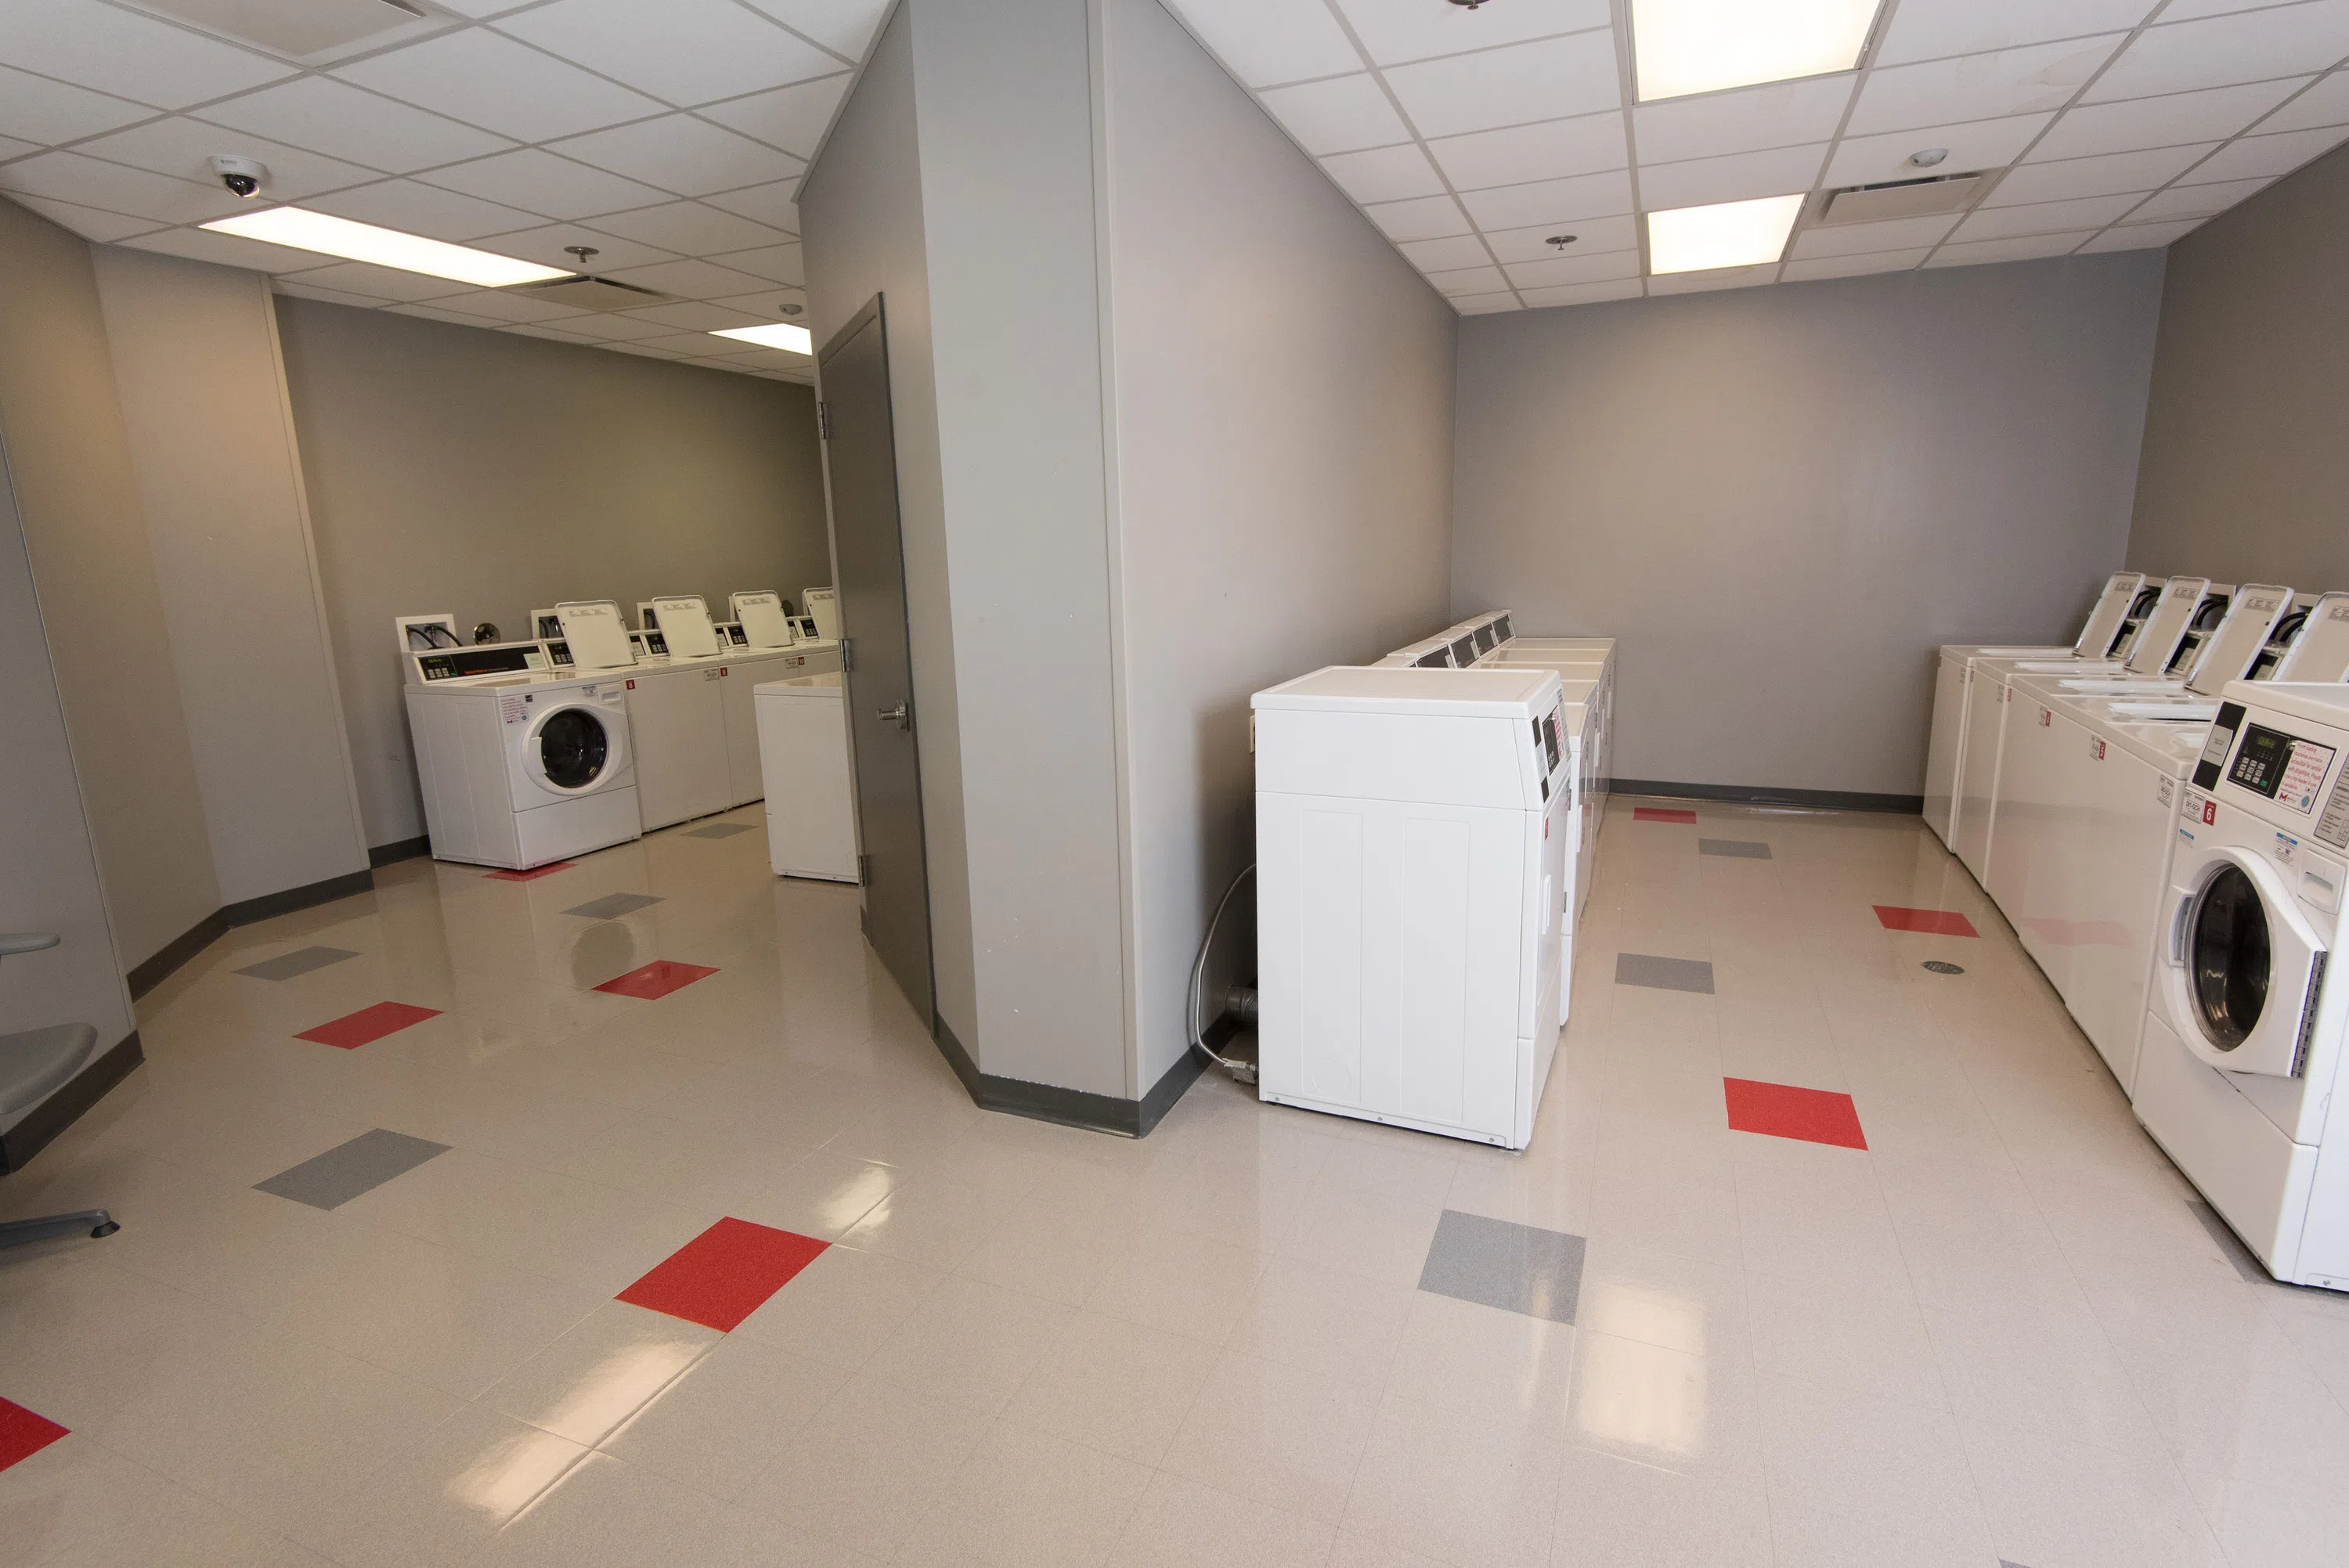 A look at the laundry room. Saints hall has a laundry facility for all residents on the bottom floor of the building.